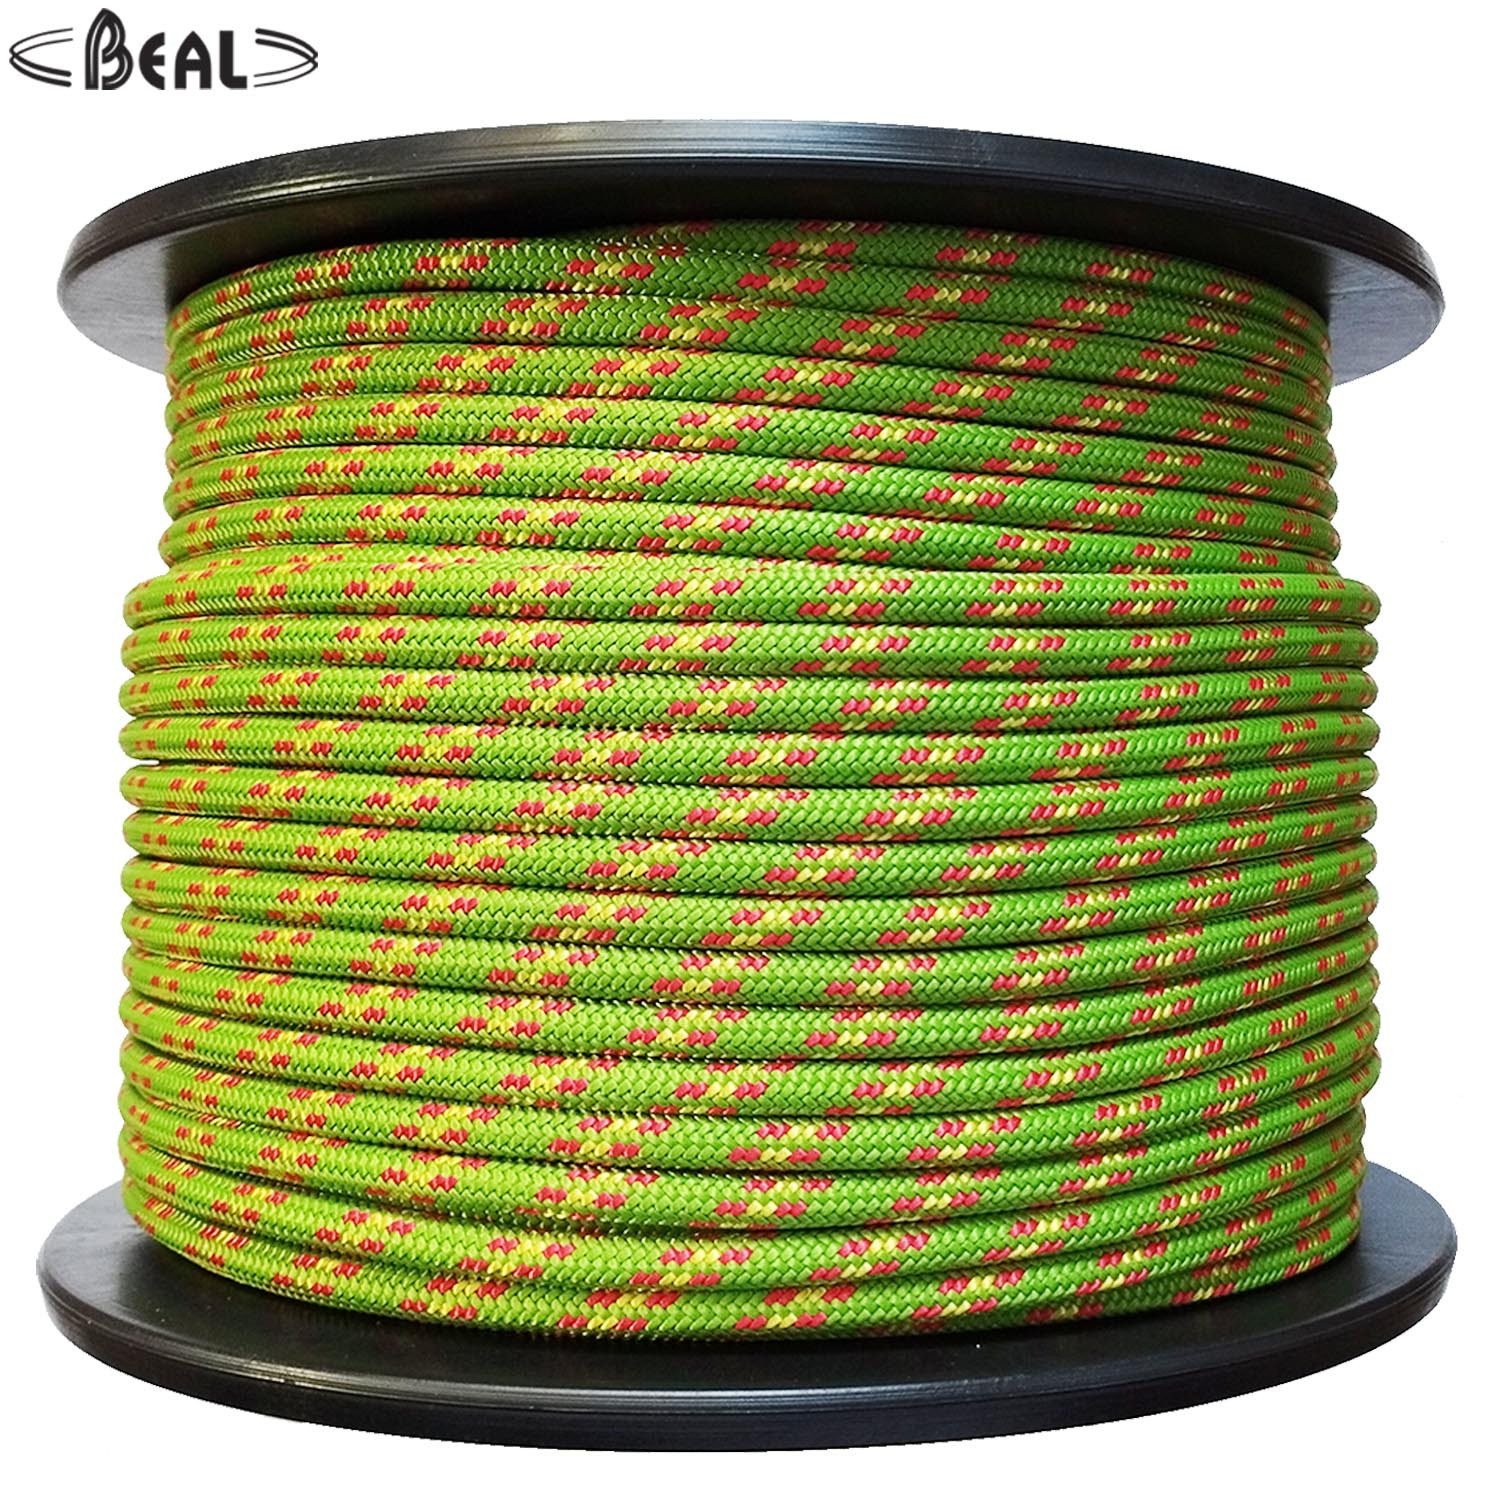 Beal 7 mm Accessory Cord 120 mtr pack